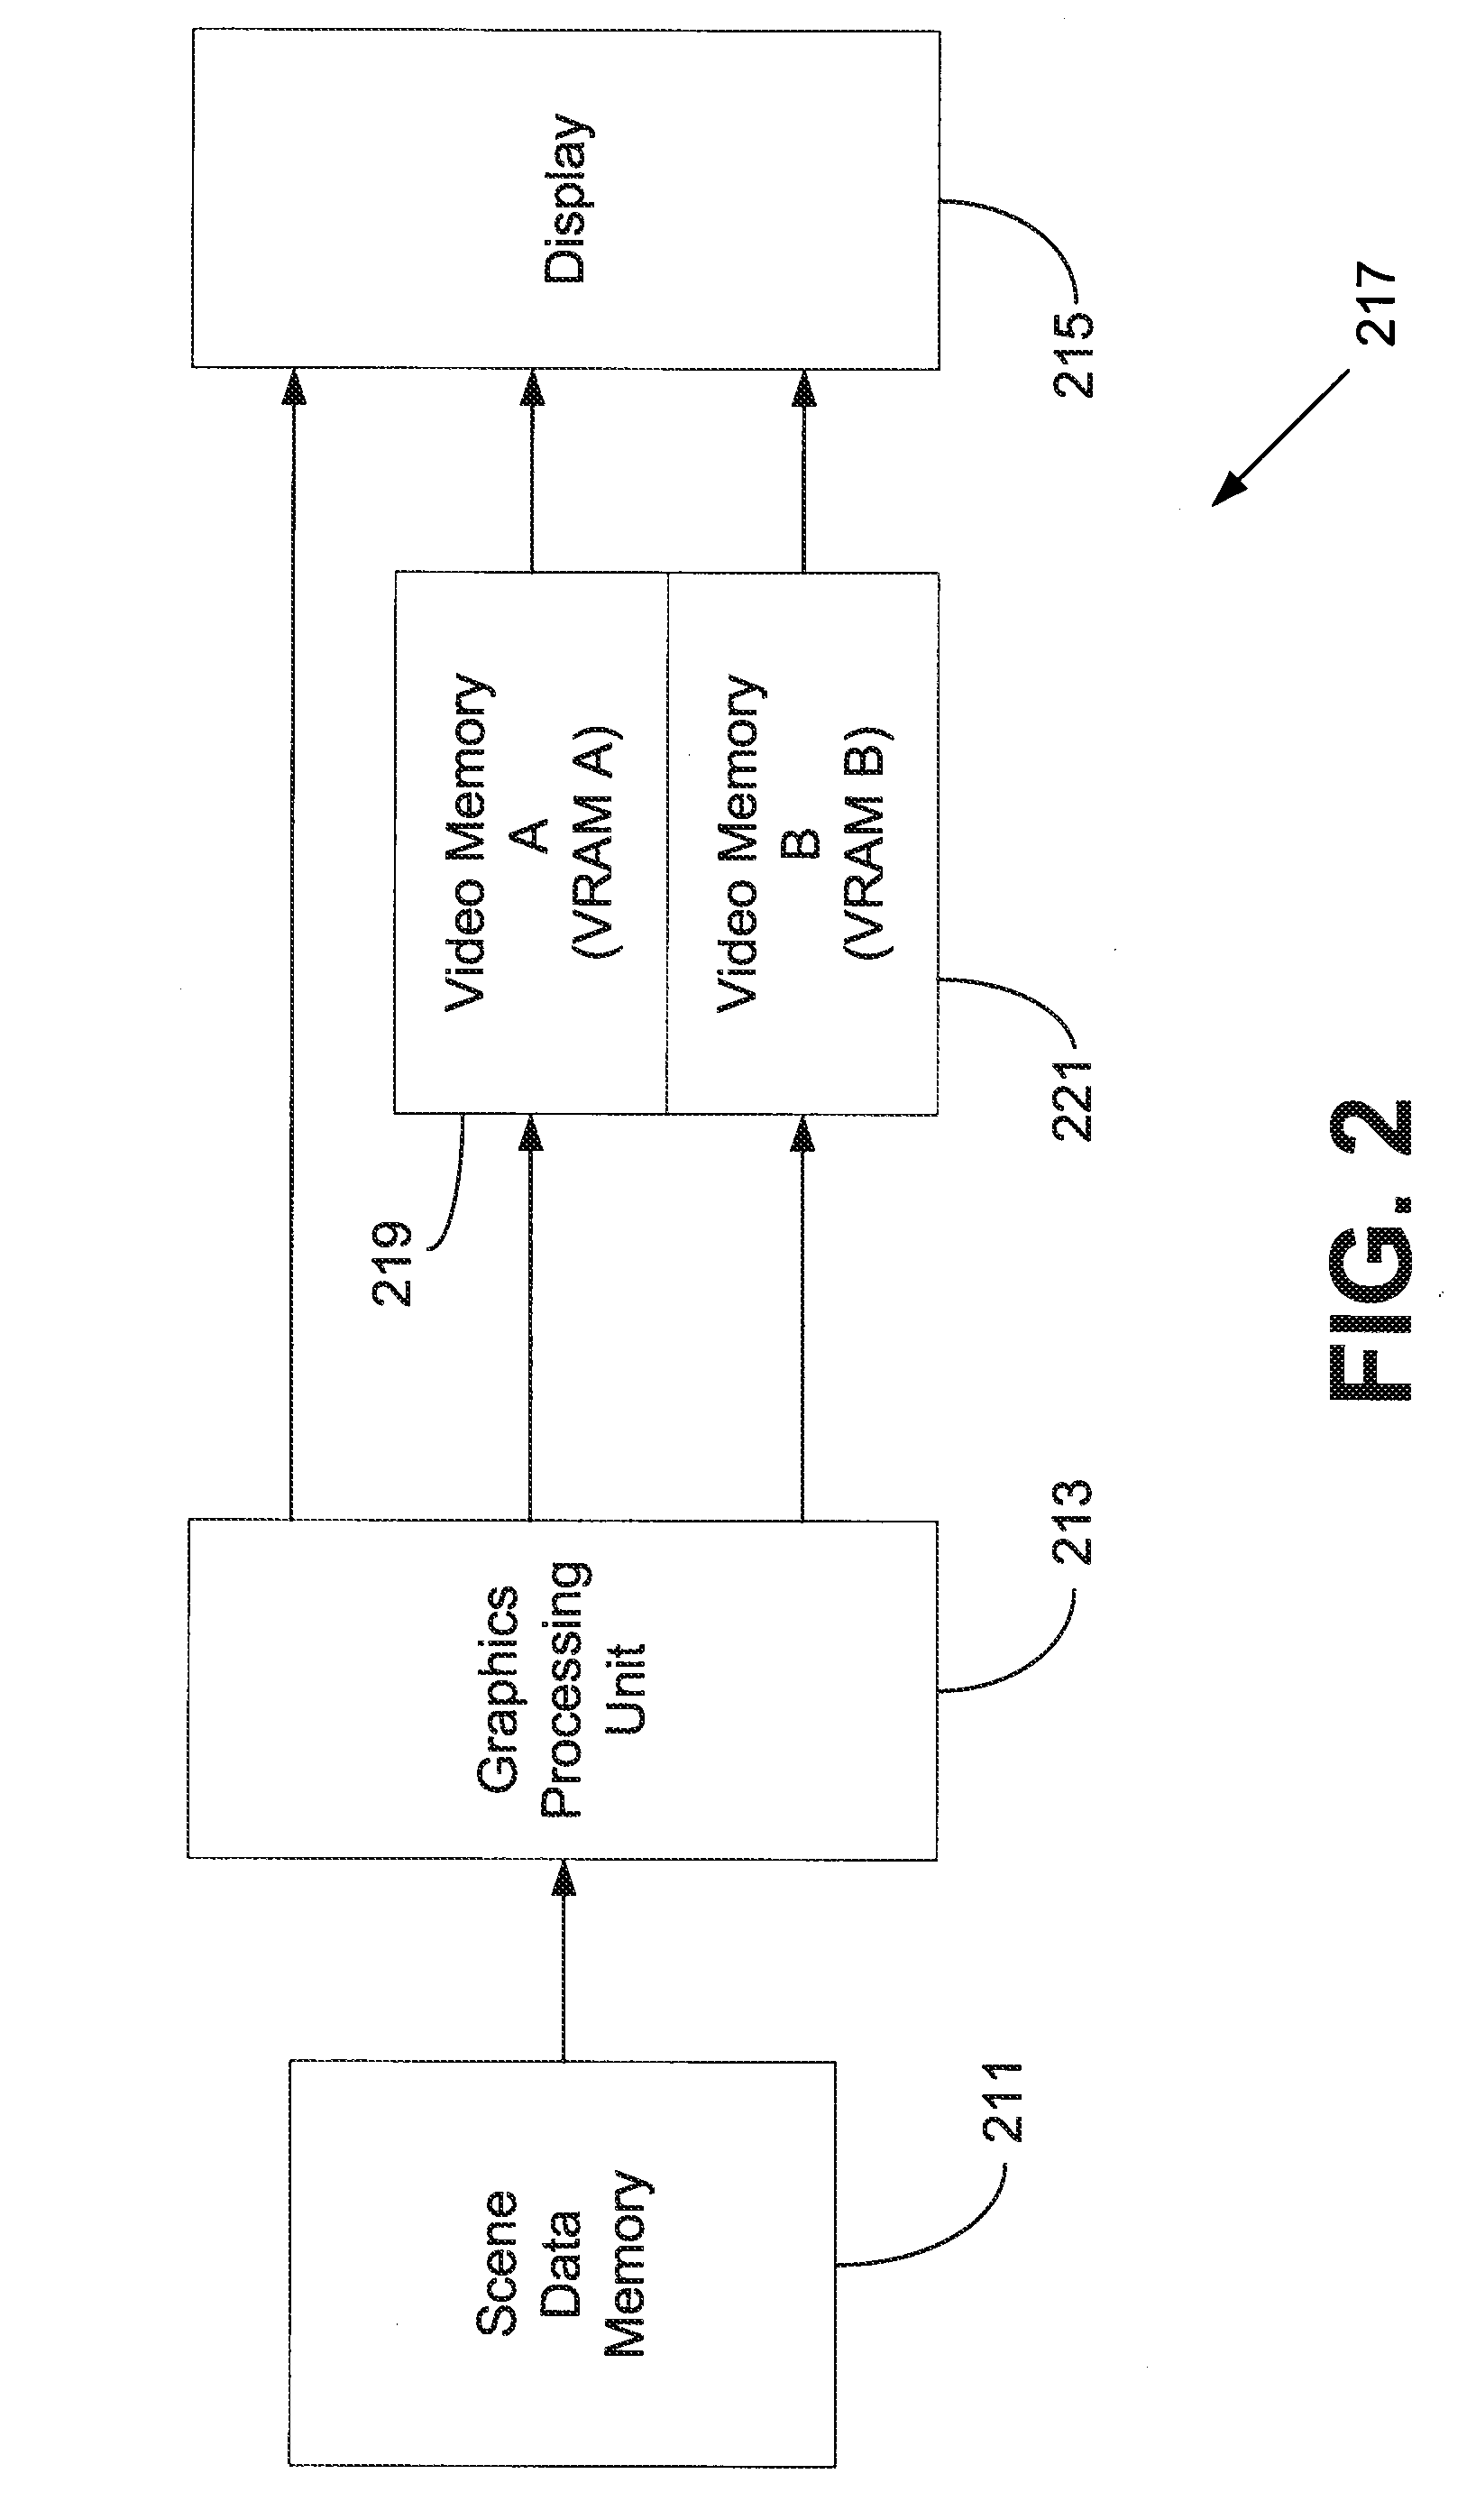 Double render processing for handheld video game device